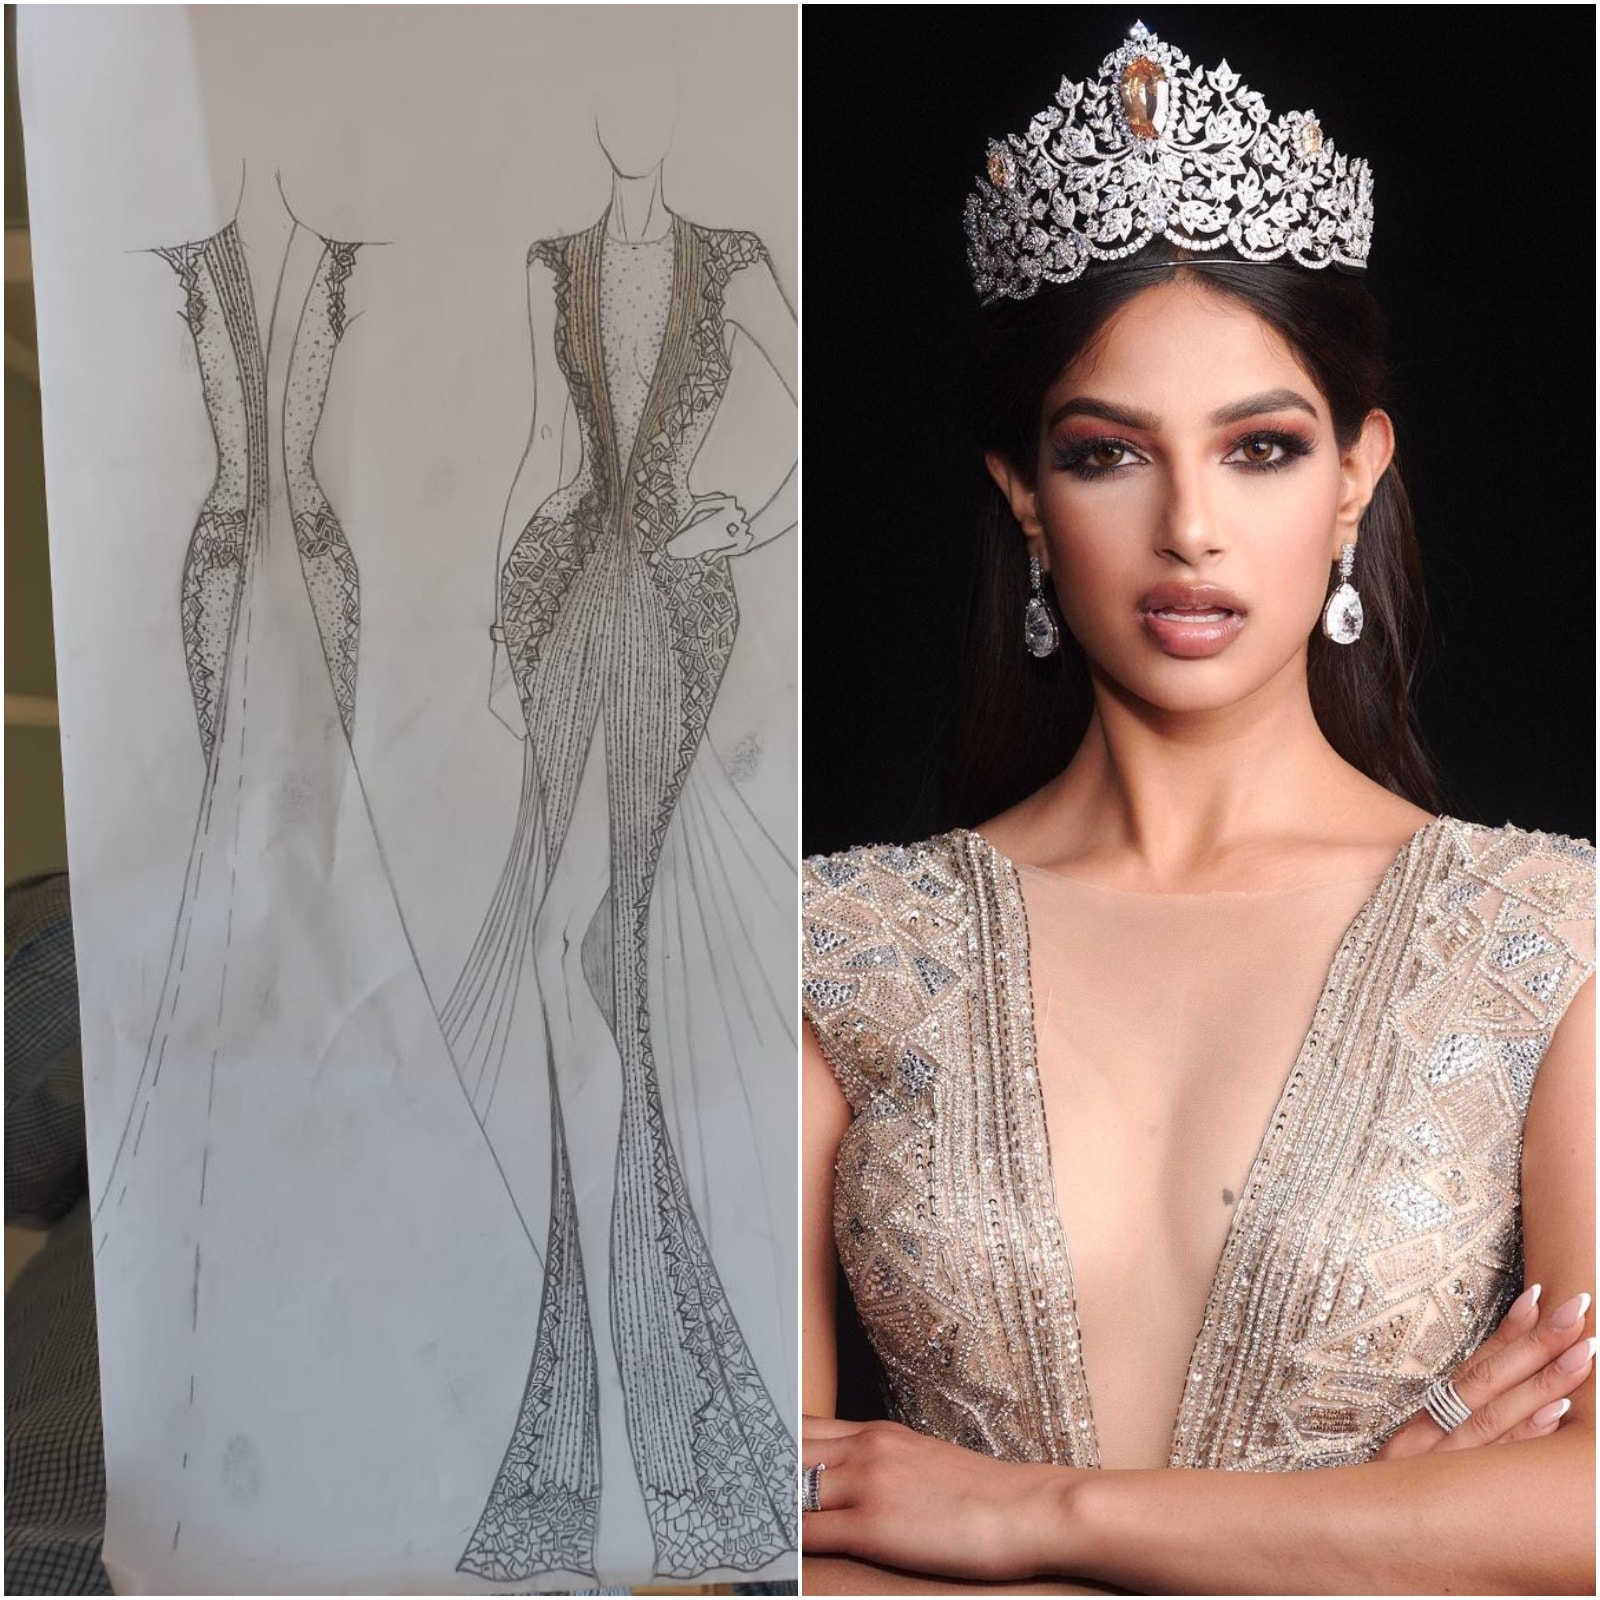 7 times Miss Universe Harnaaz Sandhu flaunted her curves in hot bodycon  gowns